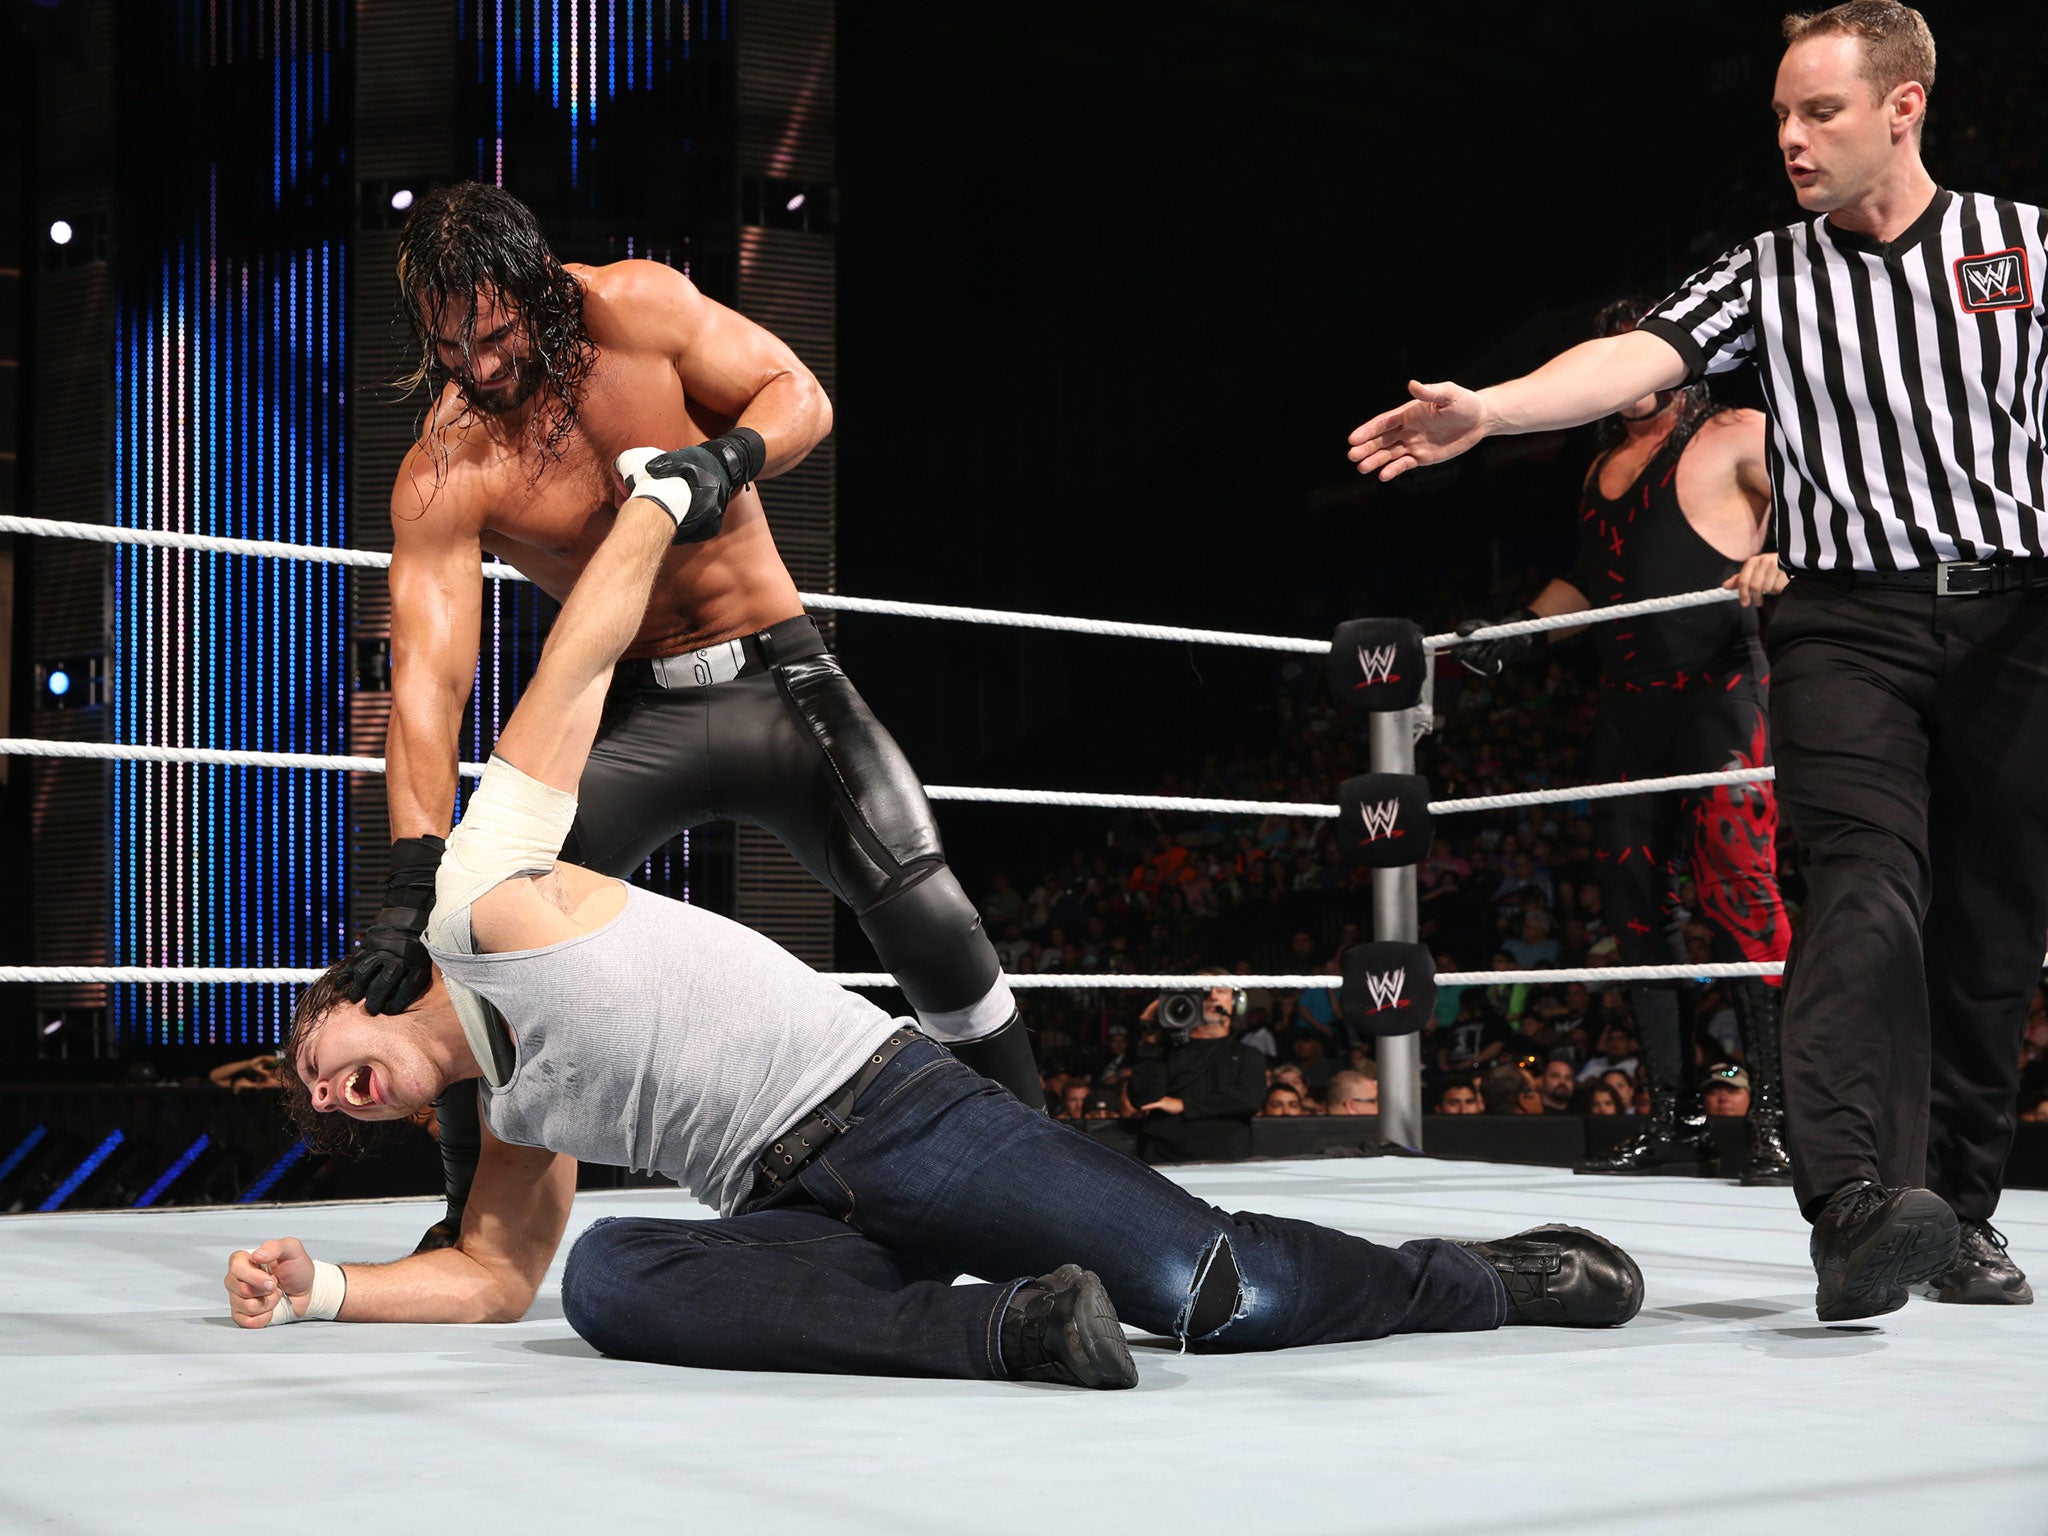 Rollins endured a long feud with Dean Ambrose after the break-up of the Shield